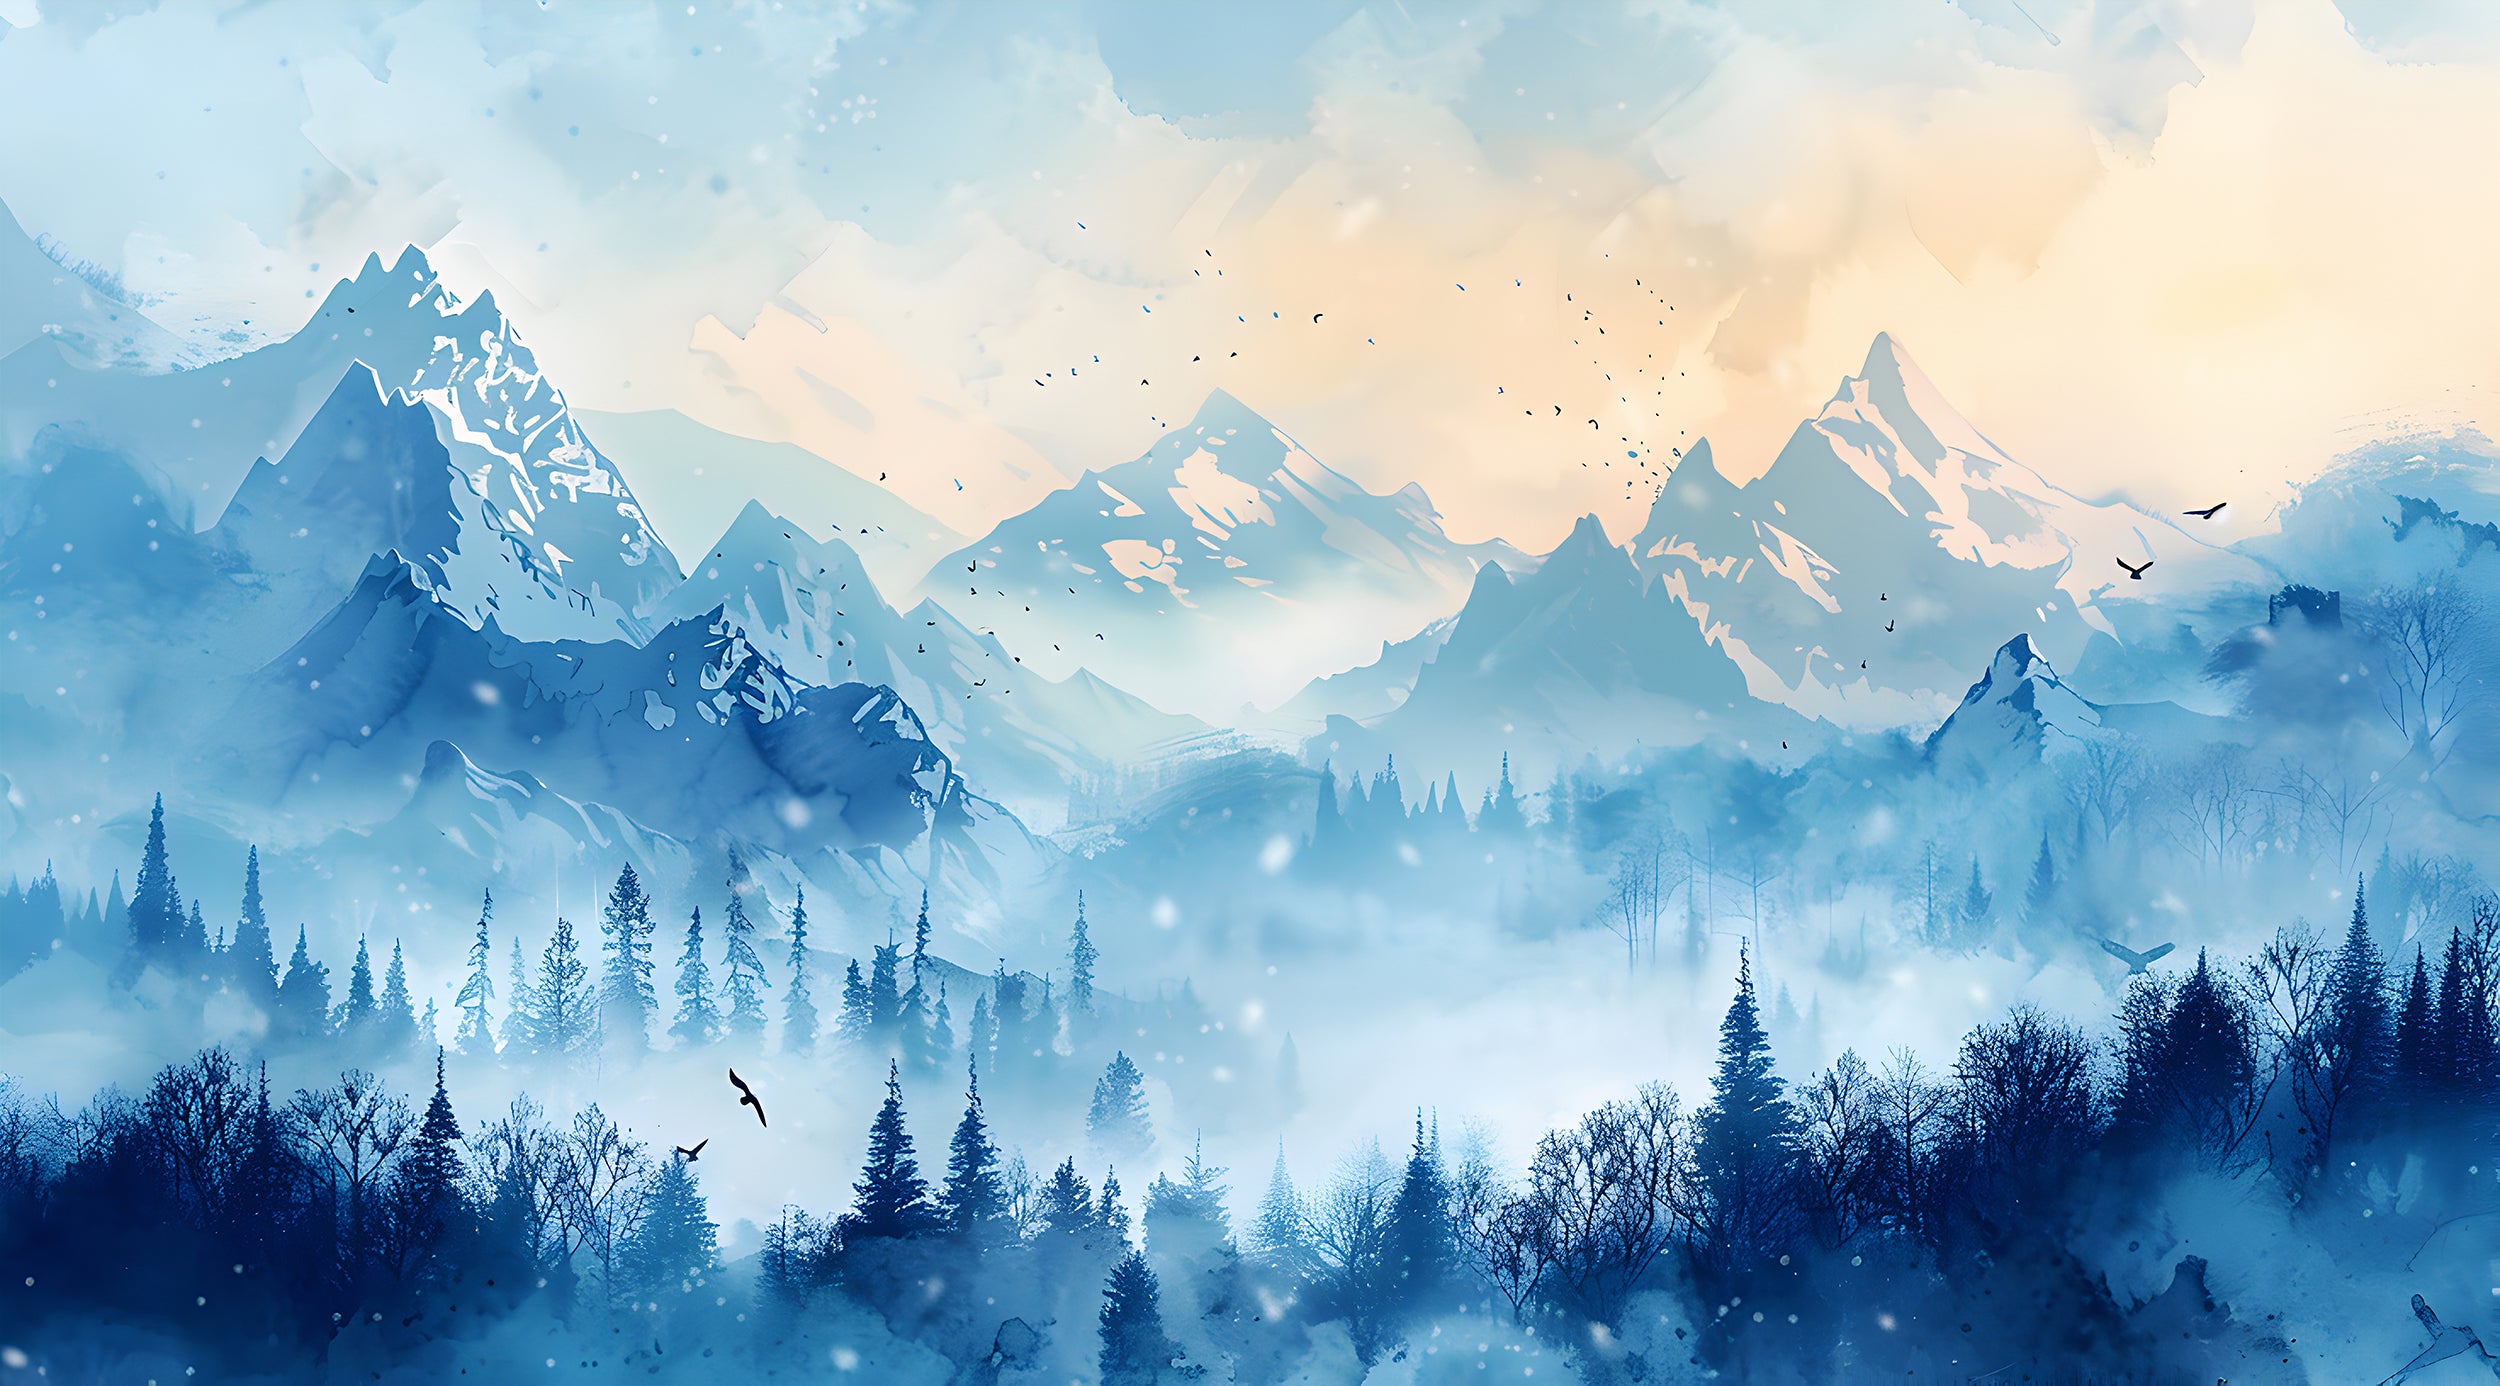 Winter Mountains Mural, Watercolor Blue Mountain and Forest Landscape, Peel and Stick Foggy Nature Wallpaper, Nursery Removable Misty Decal